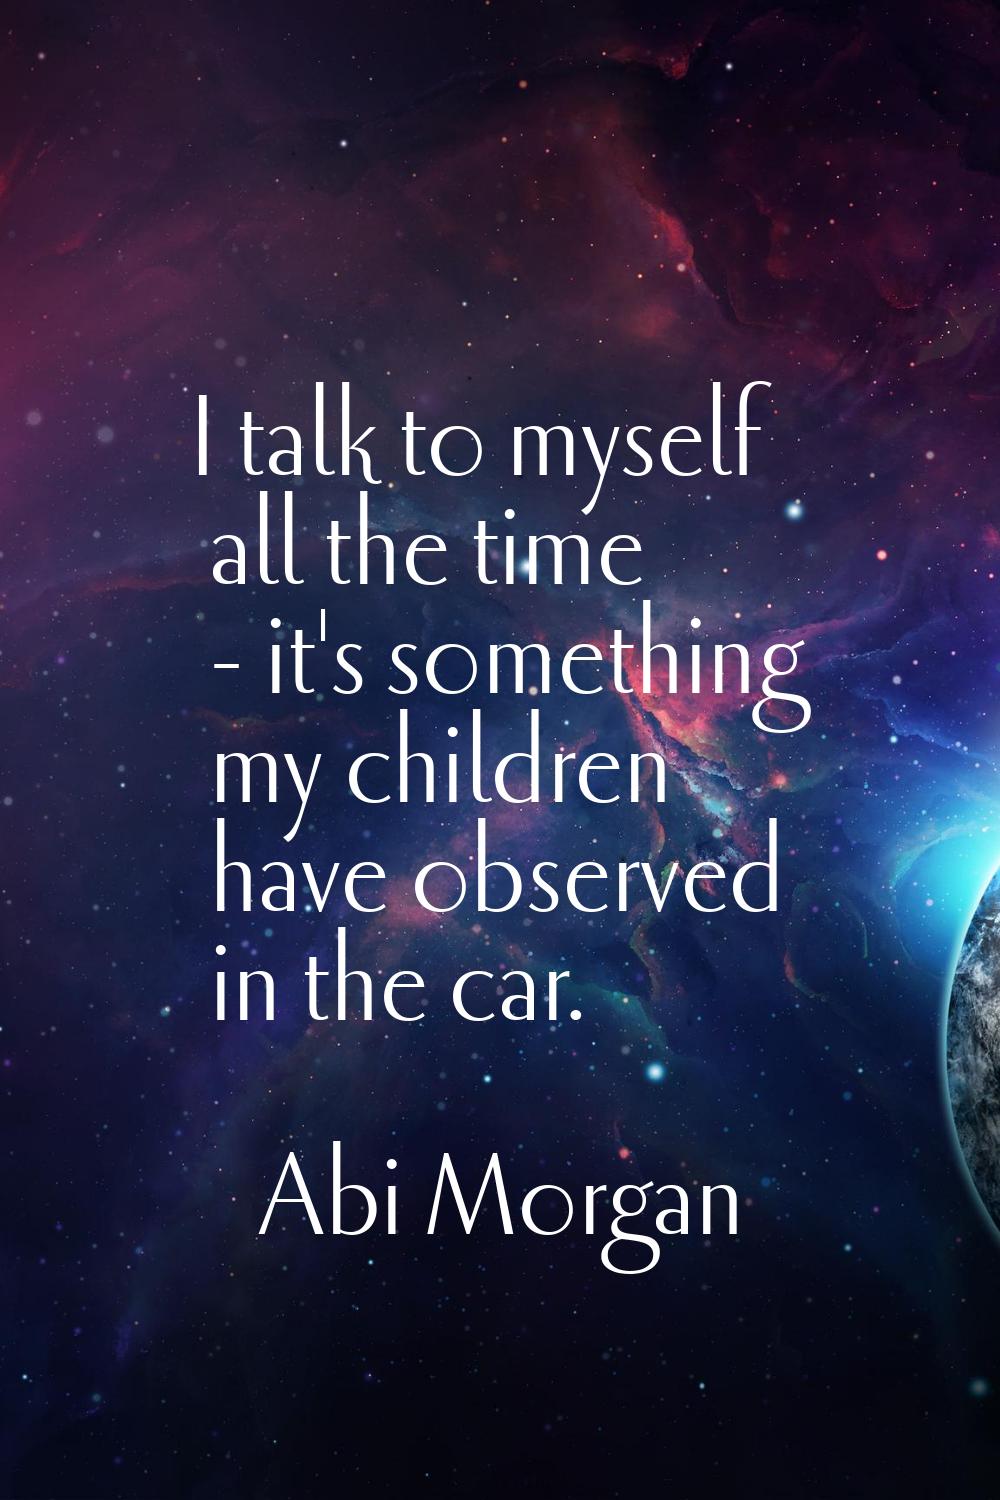 I talk to myself all the time - it's something my children have observed in the car.